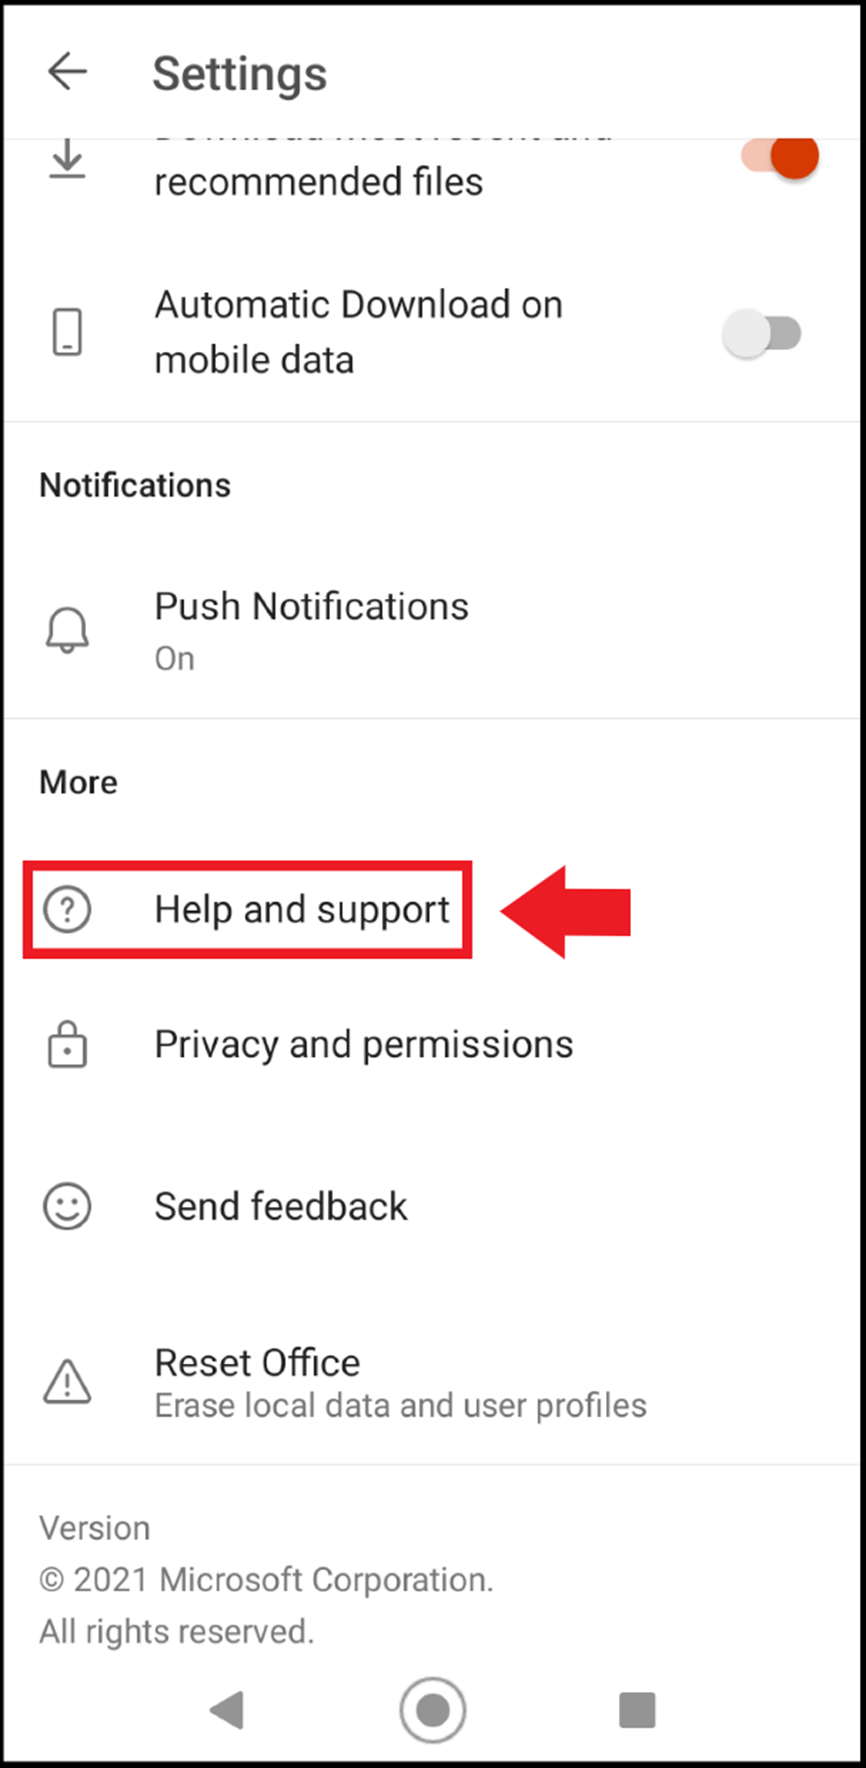 Go to the Settings menu and open “Help and support” in your browser app